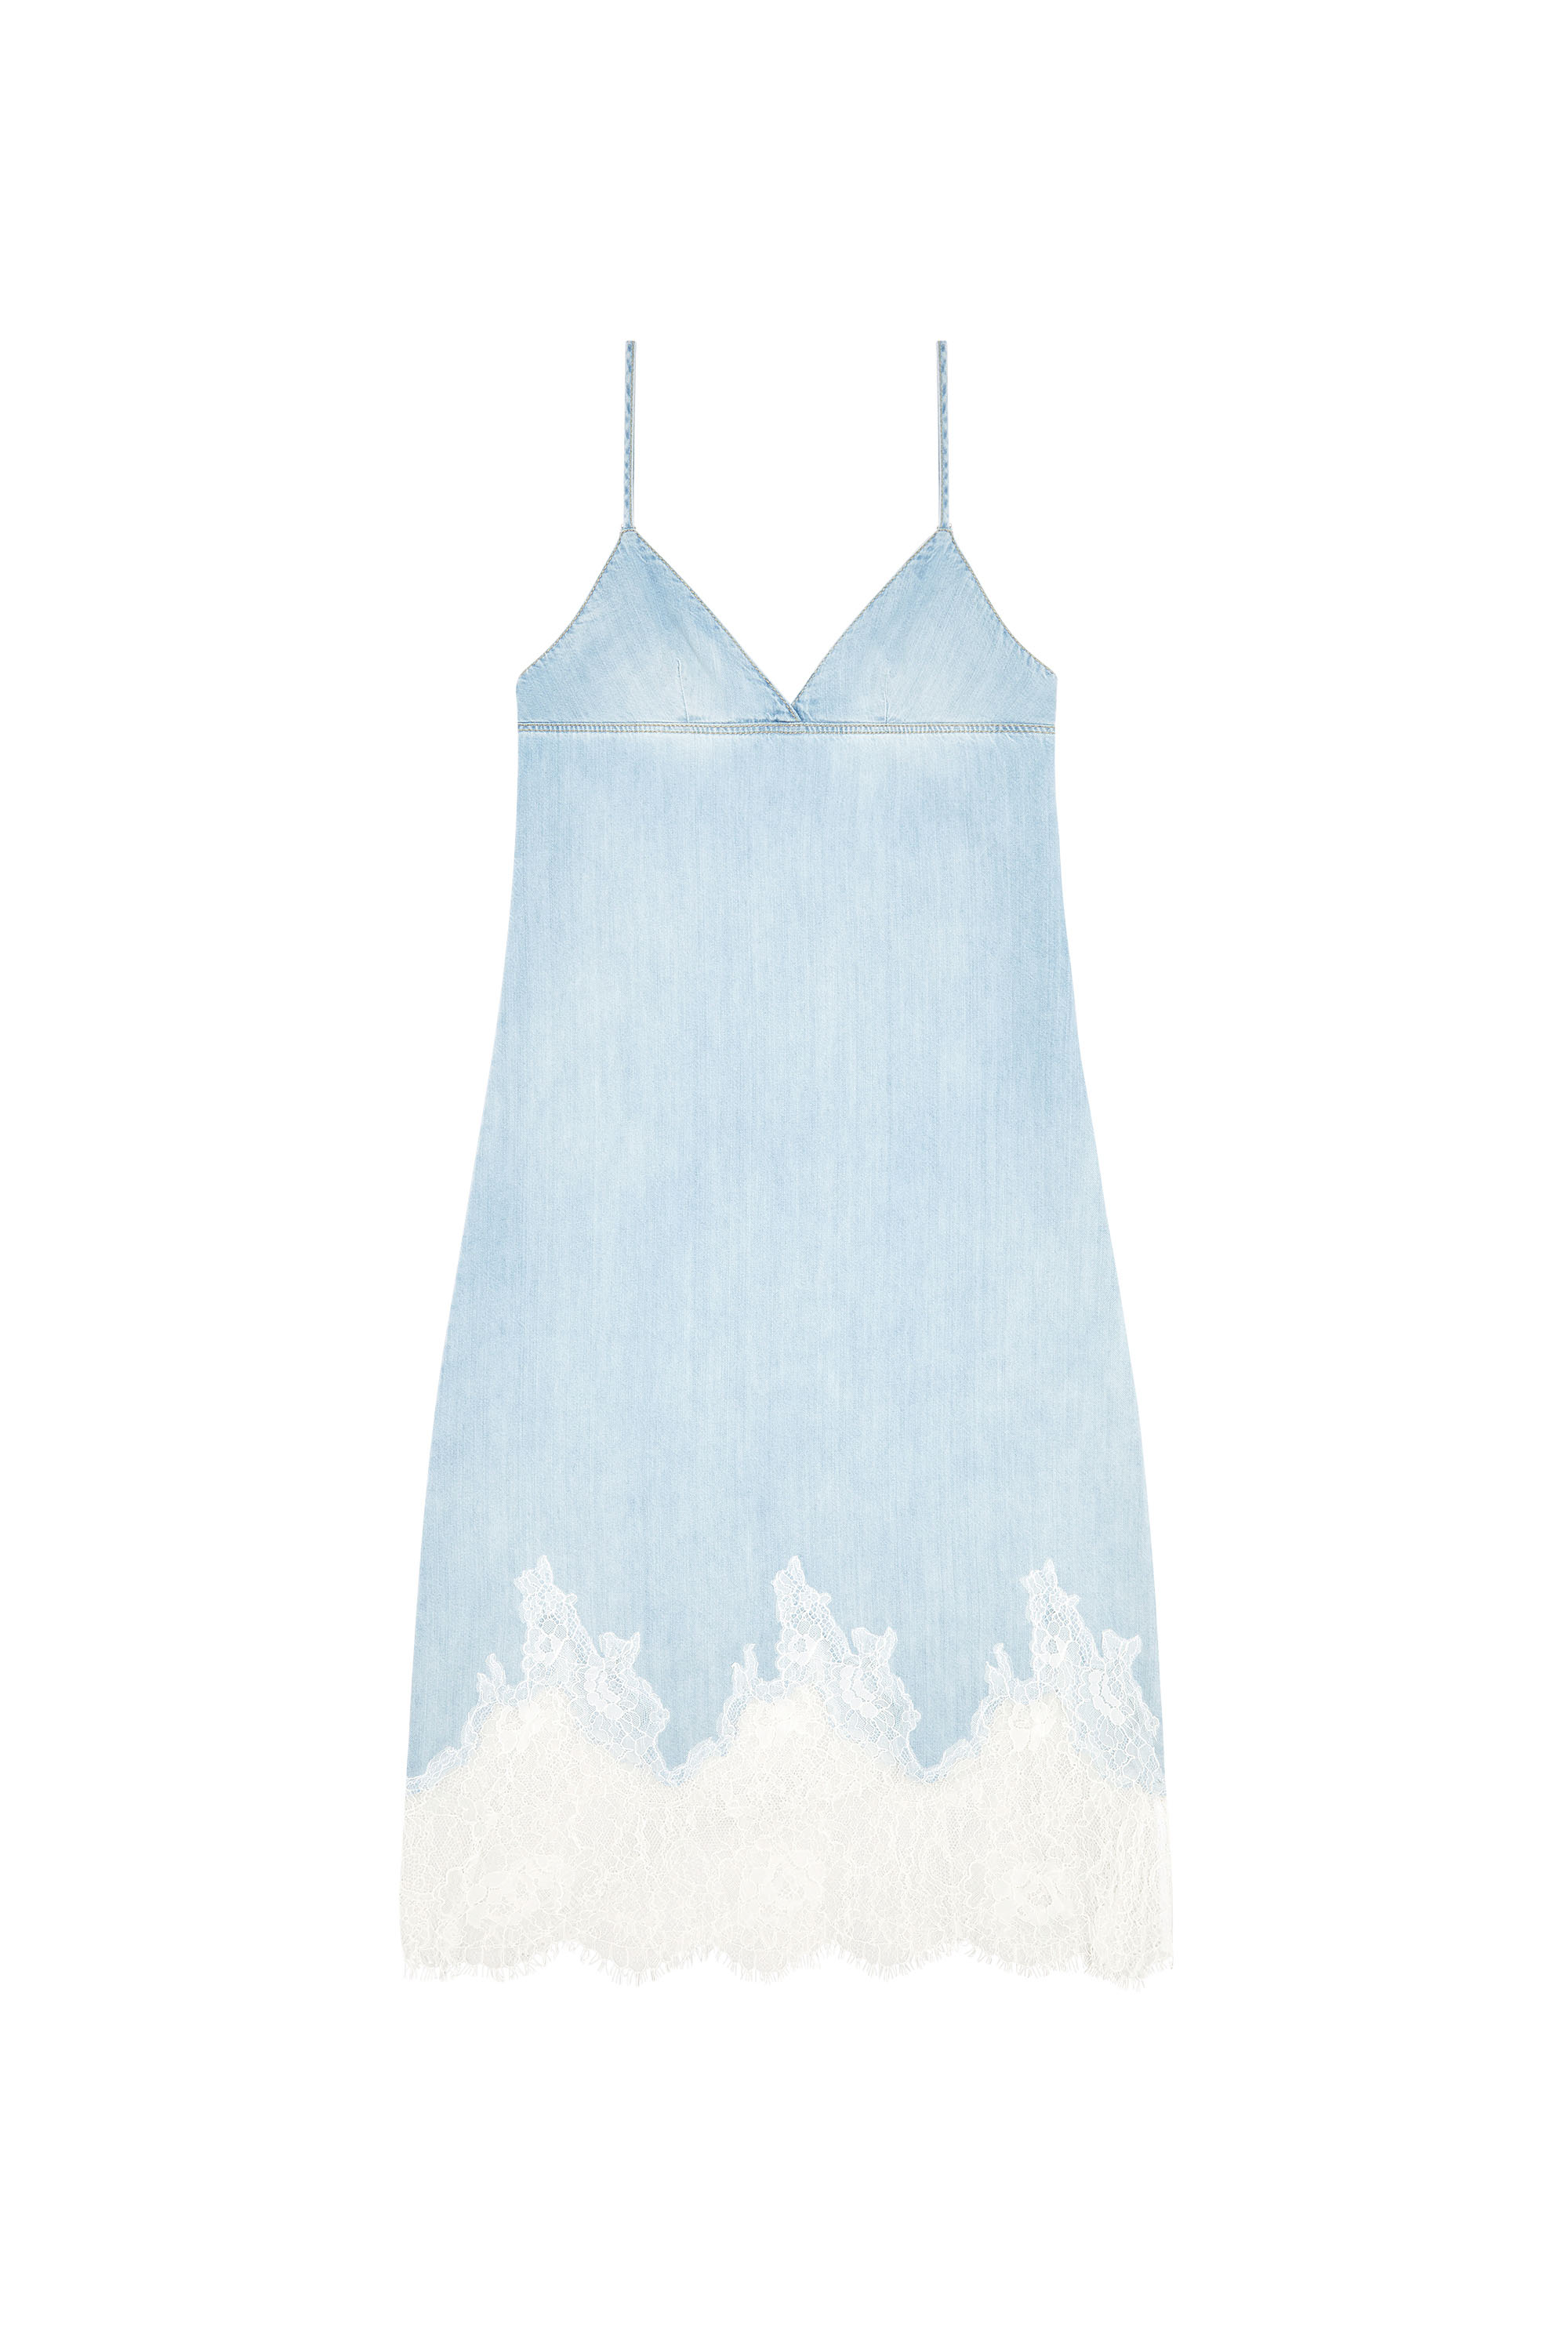 Diesel - DE-RUDE-S, Woman Strappy dress in denim and lace in Blue - Image 2